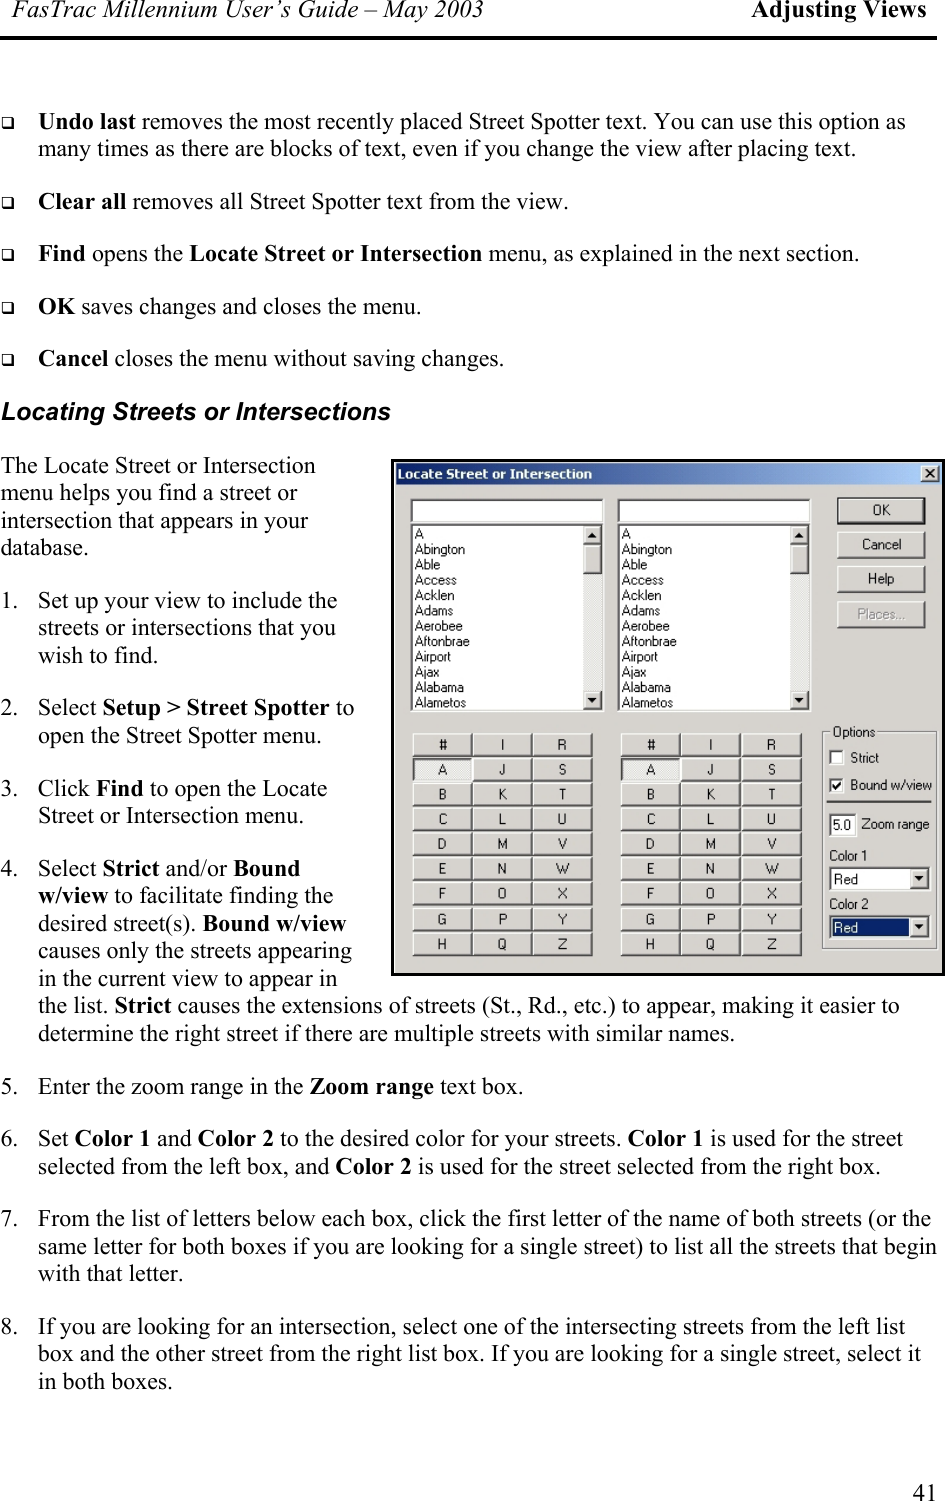 FasTrac Millennium User’s Guide – May 2003 Adjusting Views   Undo last removes the most recently placed Street Spotter text. You can use this option as many times as there are blocks of text, even if you change the view after placing text.   Clear all removes all Street Spotter text from the view.   Find opens the Locate Street or Intersection menu, as explained in the next section.   OK saves changes and closes the menu.   Cancel closes the menu without saving changes. Locating Streets or Intersections The Locate Street or Intersection menu helps you find a street or intersection that appears in your database. 1.  Set up your view to include the streets or intersections that you wish to find. 2. Select Setup &gt; Street Spotter to open the Street Spotter menu. 3. Click Find to open the Locate Street or Intersection menu. 4. Select Strict and/or Bound w/view to facilitate finding the desired street(s). Bound w/view causes only the streets appearing in the current view to appear in the list. Strict causes the extensions of streets (St., Rd., etc.) to appear, making it easierdetermine the right street if there are multiple streets with similar names.  to 5.  Enter the zoom range in the Zoom range text box. 6. Set Color 1 and Color 2 to the desired color for your streets. Color 1 is used for the street selected from the left box, and Color 2 is used for the street selected from the right box. 7.  From the list of letters below each box, click the first letter of the name of both streets (or the same letter for both boxes if you are looking for a single street) to list all the streets that begin with that letter. 8.  If you are looking for an intersection, select one of the intersecting streets from the left list box and the other street from the right list box. If you are looking for a single street, select it in both boxes. 41 